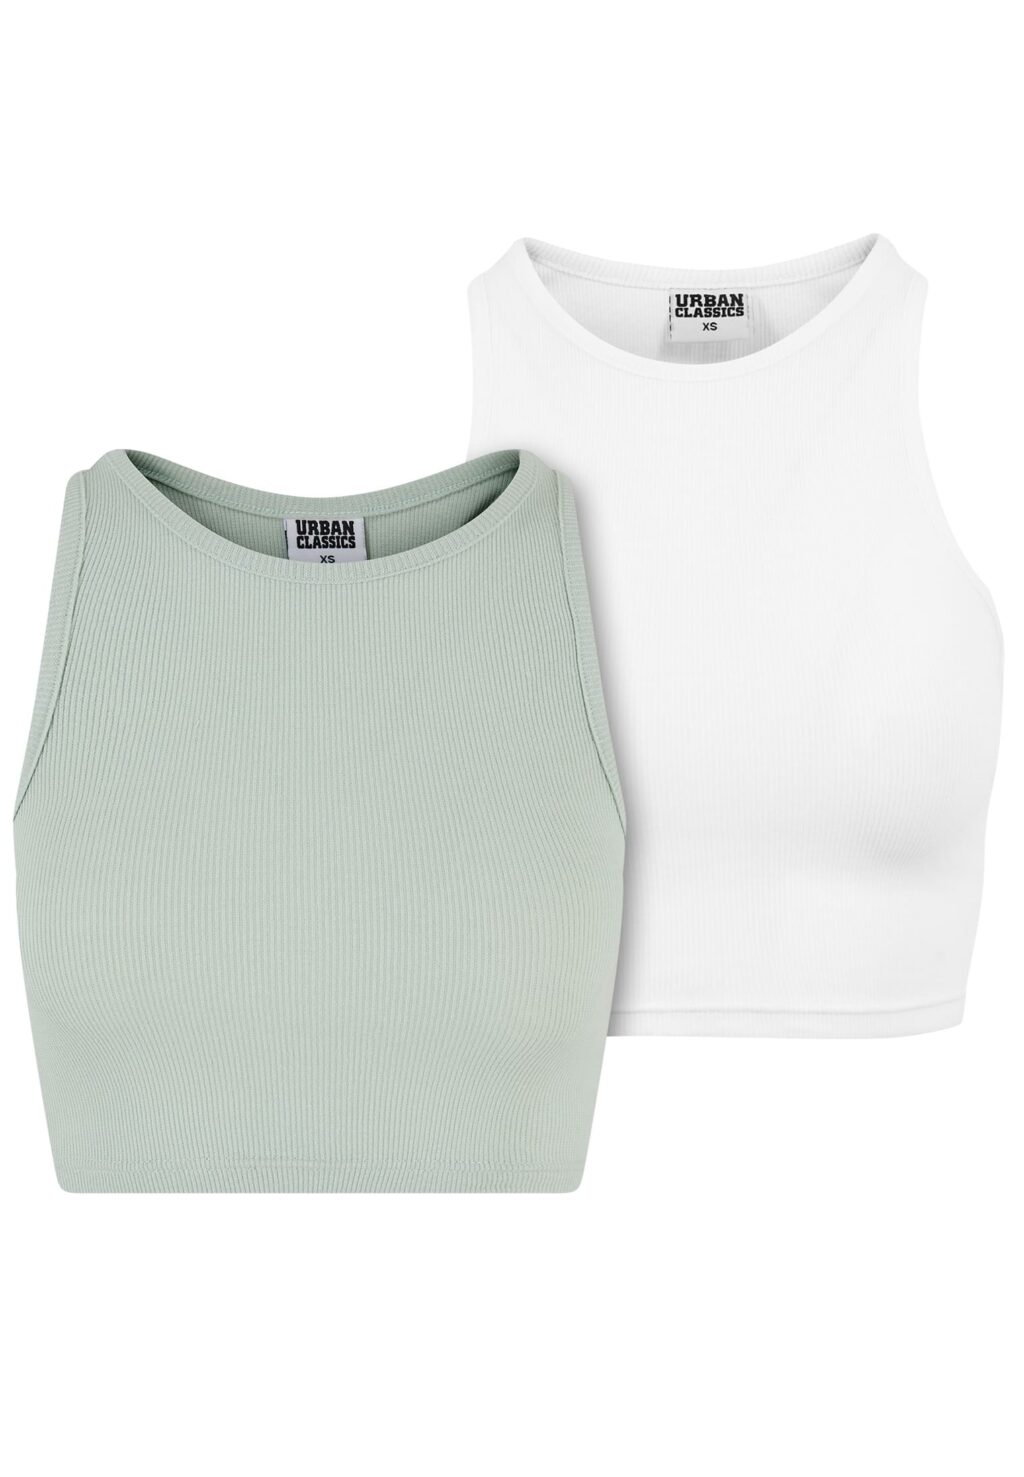 Urban Classics Ladies Cropped Rib Top 2-Pack frostmint+white TB1498A